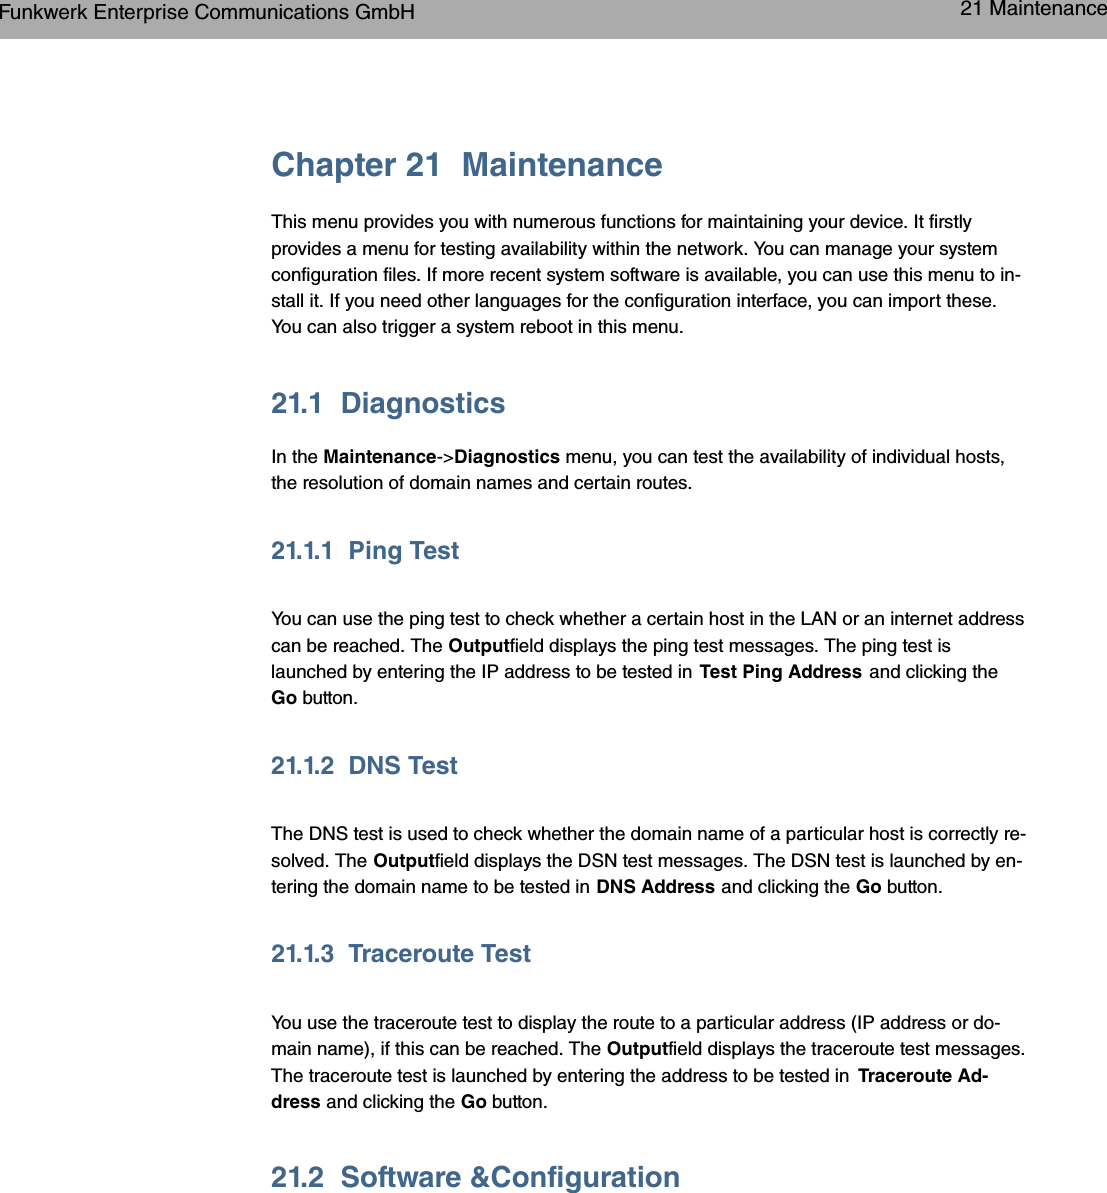 Chapter 21 MaintenanceThis menu provides you with numerous functions for maintaining your device. It firstlyprovides a menu for testing availability within the network. You can manage your systemconfiguration files. If more recent system software is available, you can use this menu to in-stall it. If you need other languages for the configuration interface, you can import these.You can also trigger a system reboot in this menu.21.1 DiagnosticsIn the Maintenance-&gt;Diagnostics menu, you can test the availability of individual hosts,the resolution of domain names and certain routes.21.1.1 Ping TestYou can use the ping test to check whether a certain host in the LAN or an internet addresscan be reached. The Outputfield displays the ping test messages. The ping test islaunched by entering the IP address to be tested in Test Ping Address and clicking theGo button.21.1.2 DNS TestThe DNS test is used to check whether the domain name of a particular host is correctly re-solved. The Outputfield displays the DSN test messages. The DSN test is launched by en-tering the domain name to be tested in DNS Address and clicking the Go button.21.1.3 Traceroute TestYou use the traceroute test to display the route to a particular address (IP address or do-main name), if this can be reached. The Outputfield displays the traceroute test messages.The traceroute test is launched by entering the address to be tested in Traceroute Ad-dress and clicking the Go button.21.2 Software &amp;ConfigurationFunkwerk Enterprise Communications GmbH 21 Maintenancebintec WLAN and Industrial WLAN 315